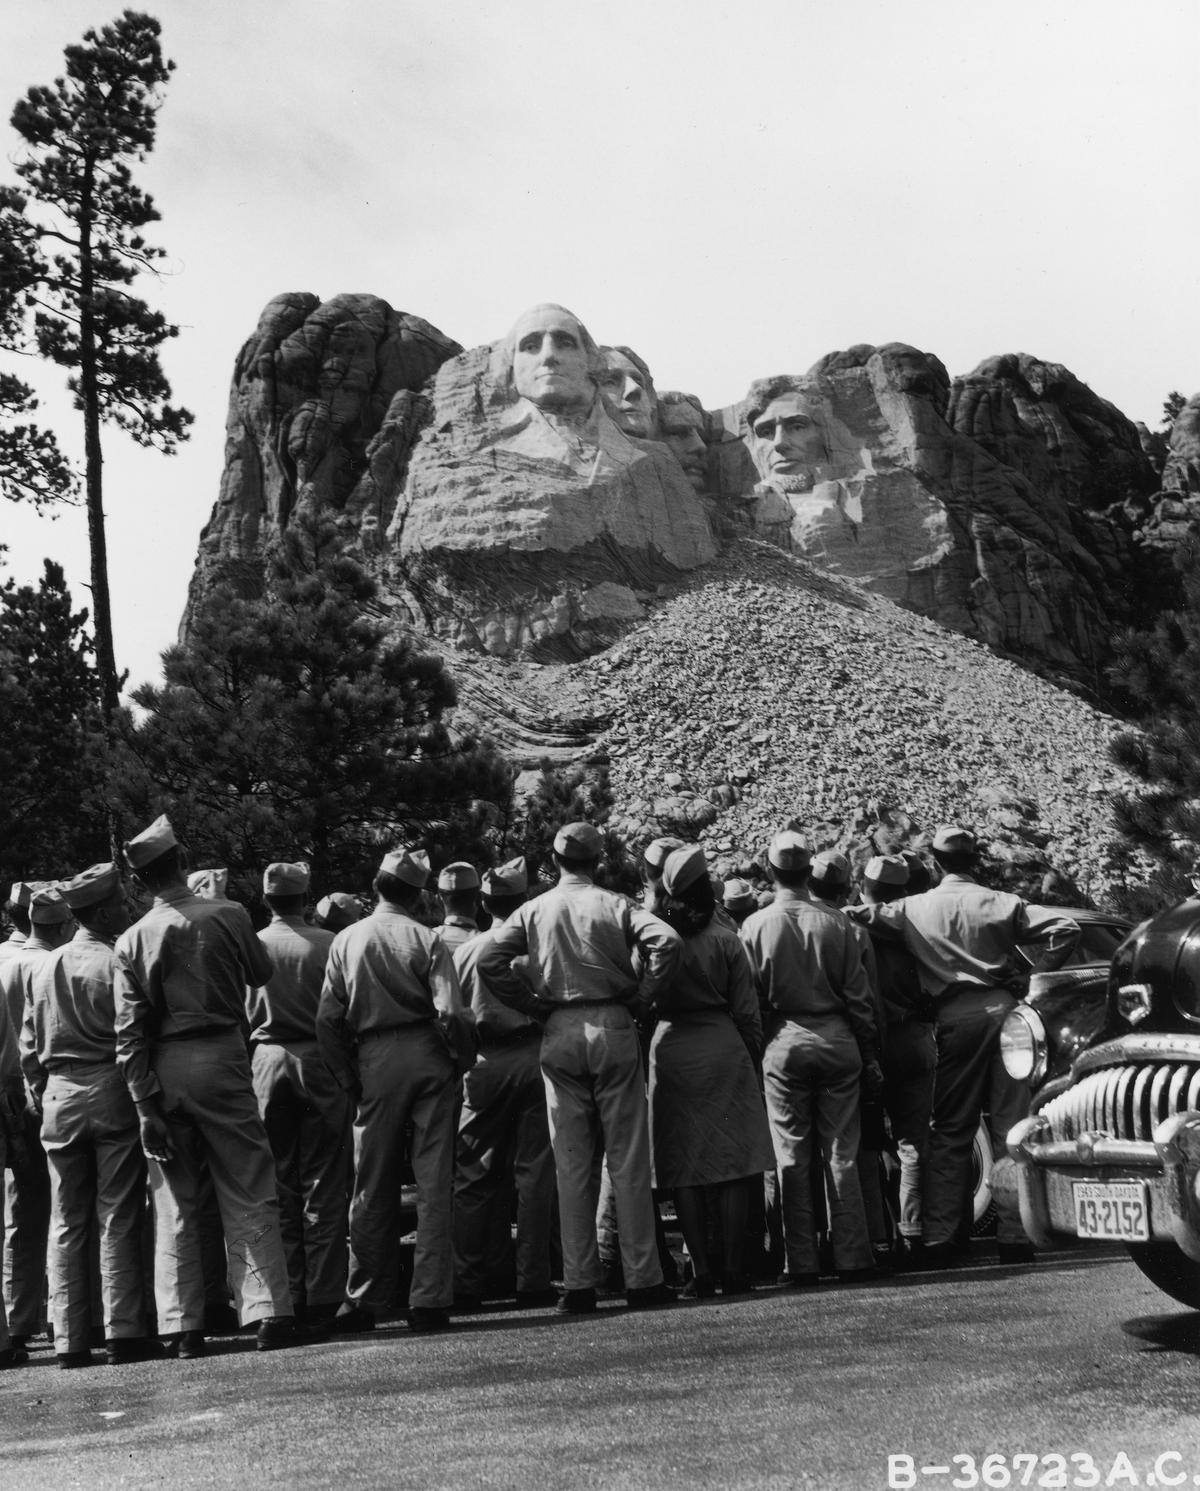 U.S. Soldiers viewing Mount Rushmore, circa 1942. (Fotosearch/Getty Images)